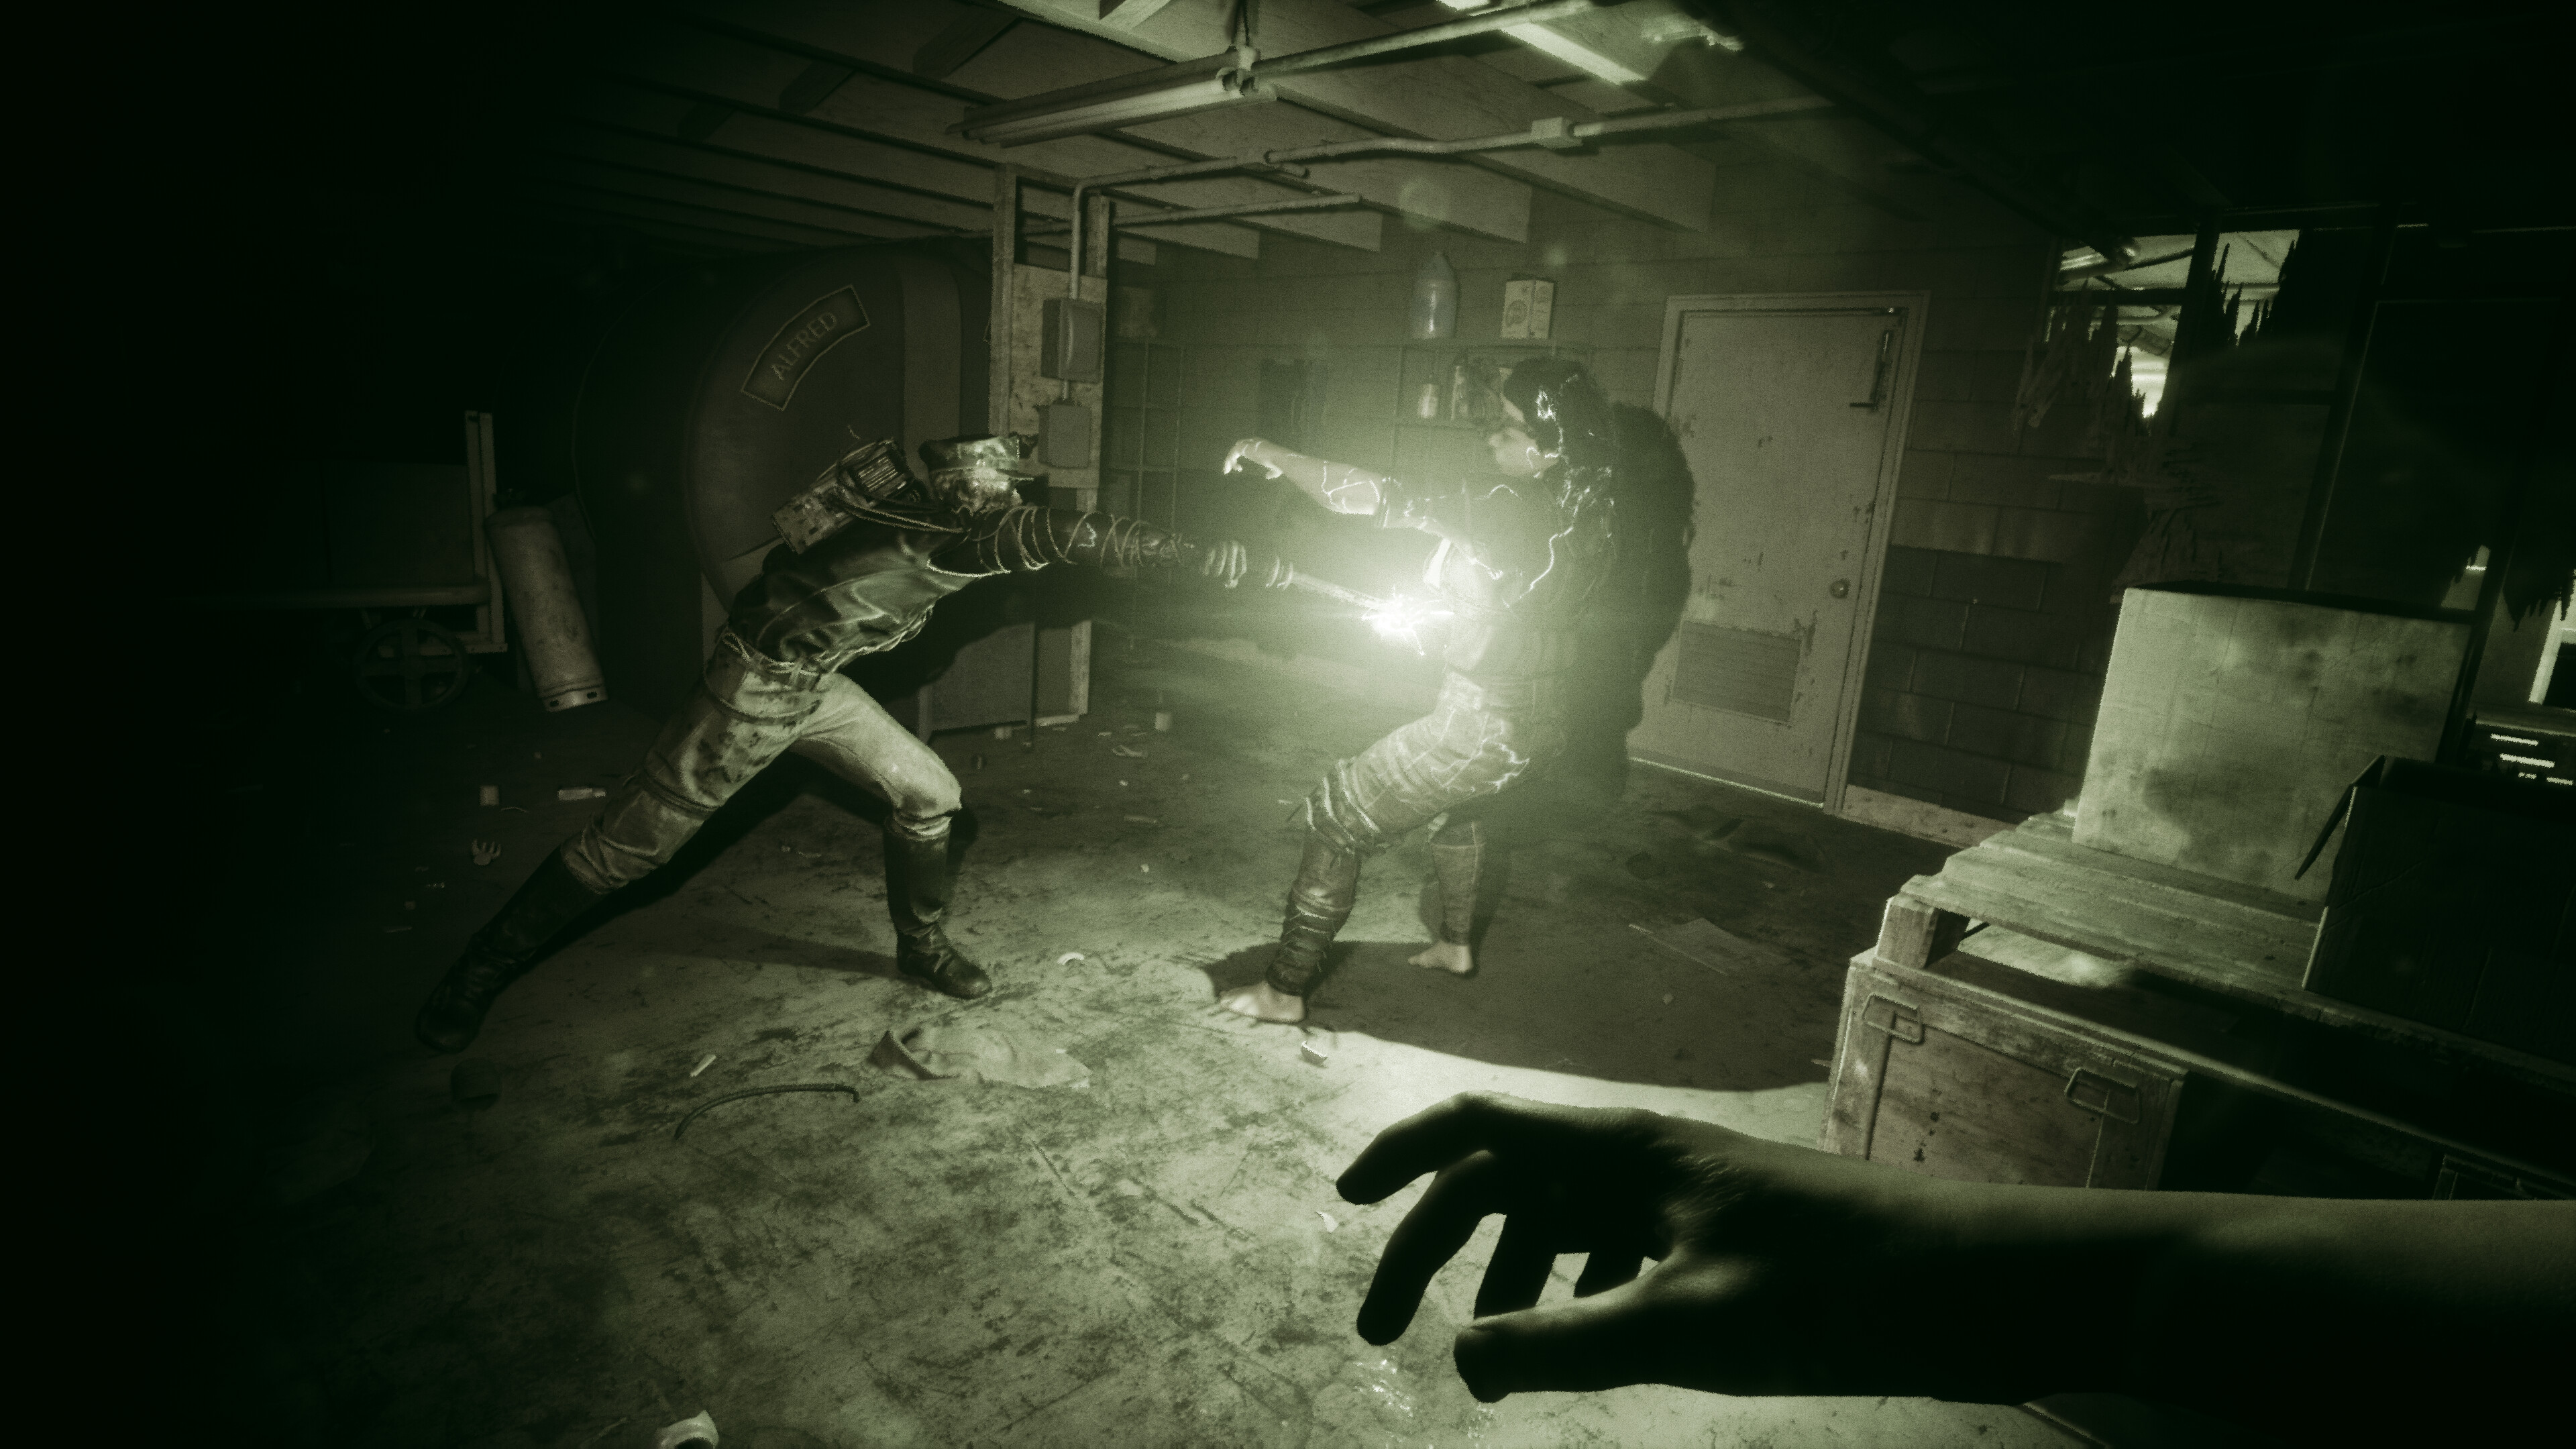 Is The Outlast Trials Coming to Consoles? - Answered - Prima Games